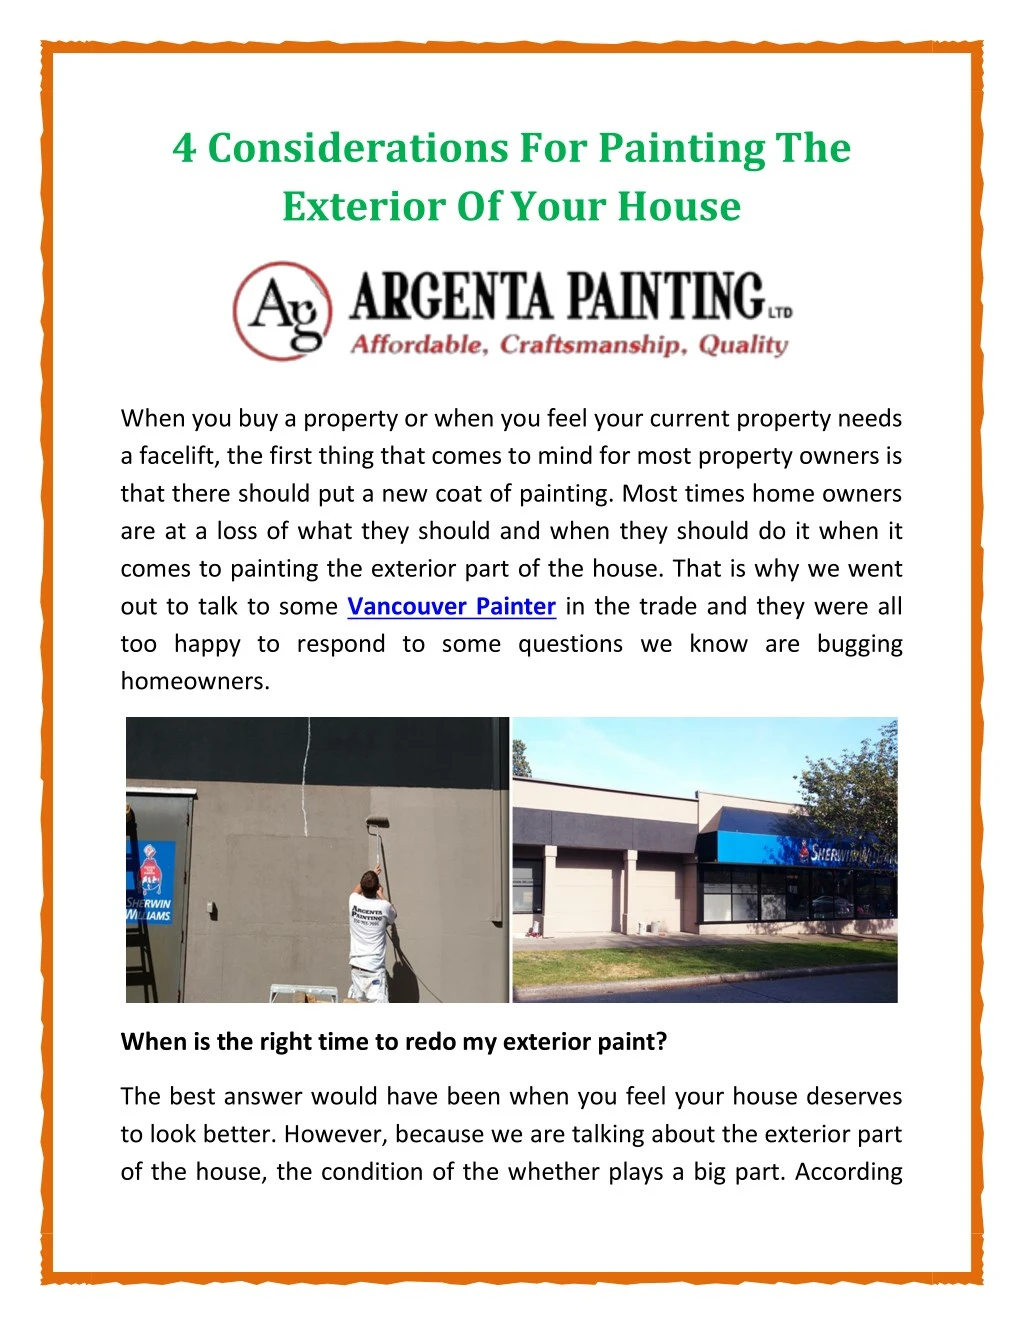 4 considerations for painting the exterior